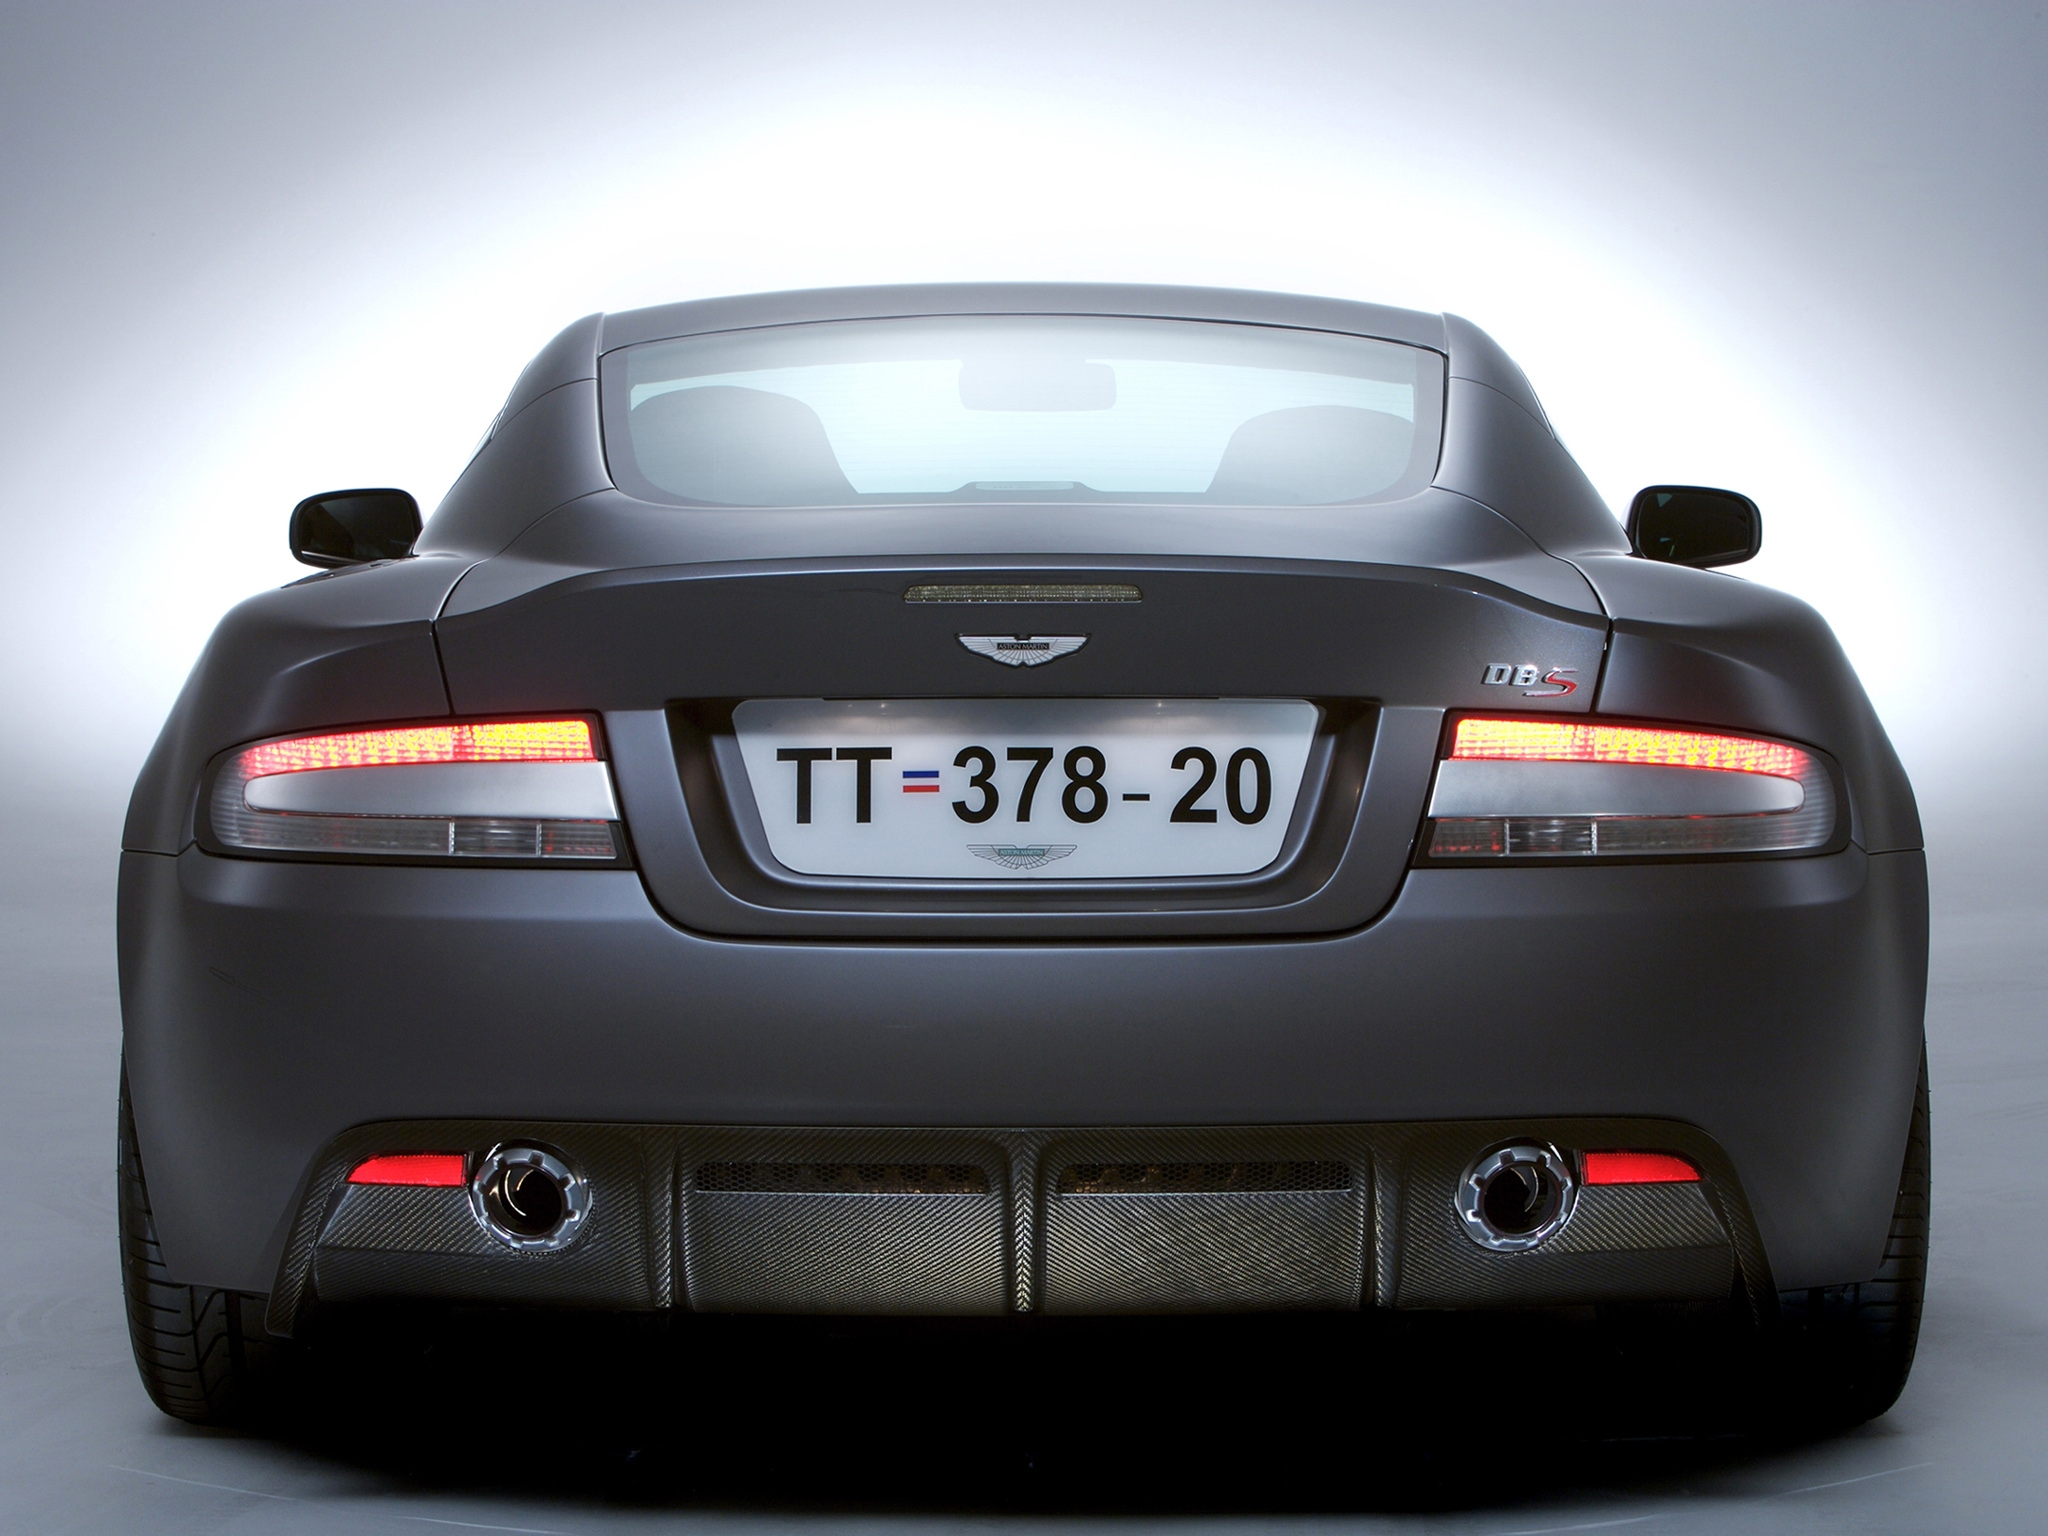 dbs, auto, aston martin, cars, grey, back view, rear view, style, 2006